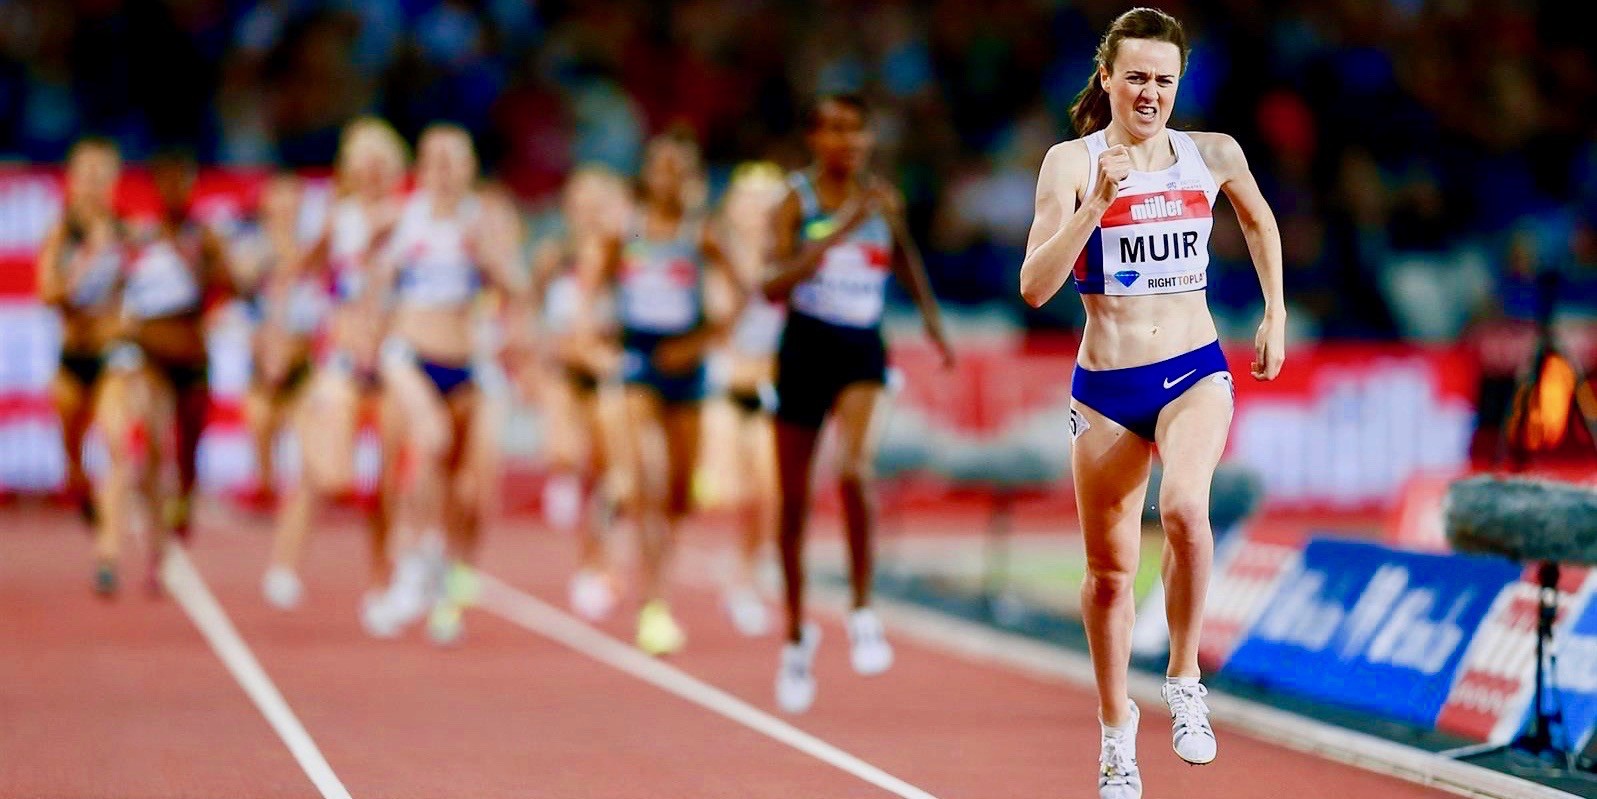 Laura Muir : I want to inspire the next generation of runners